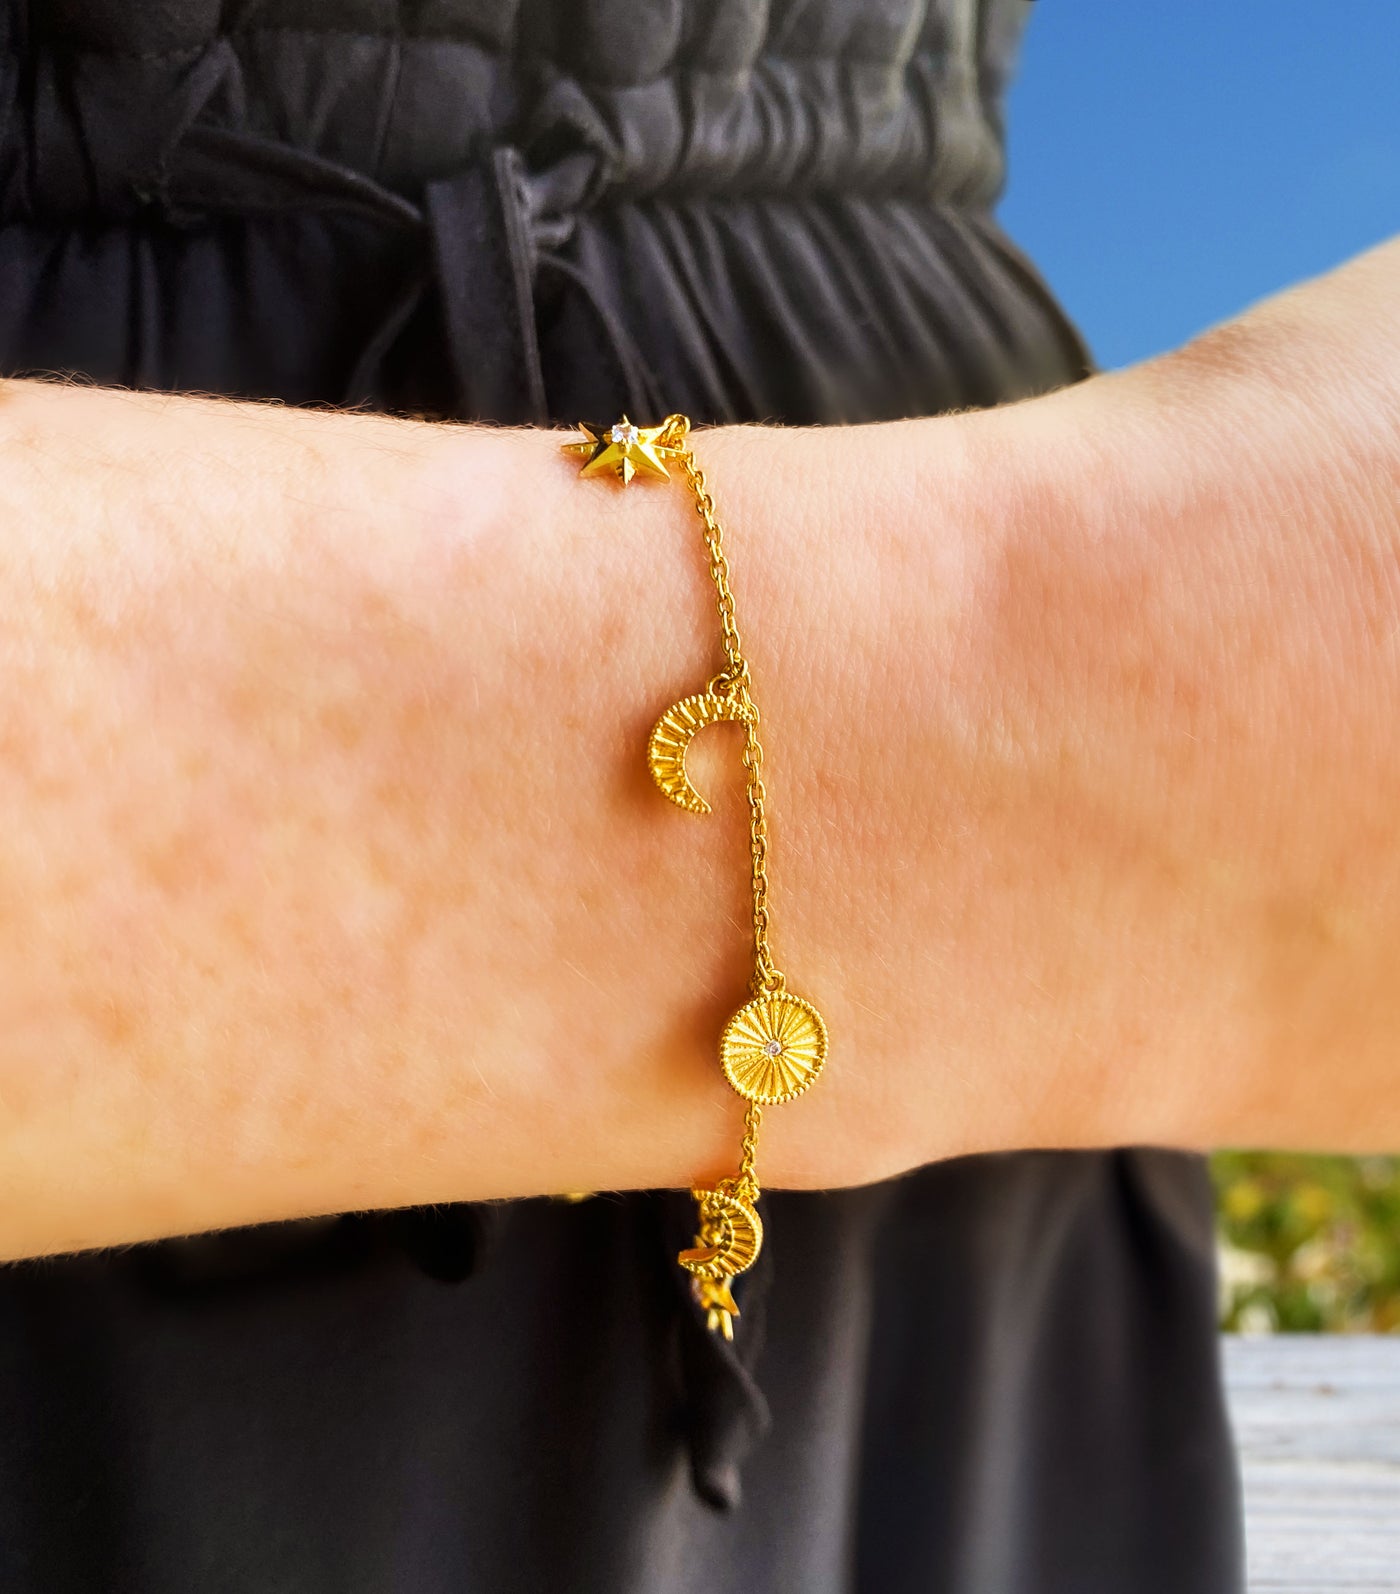 Model wearing gold plated sterling Silver moon and star charm bracelet with CZ crystals